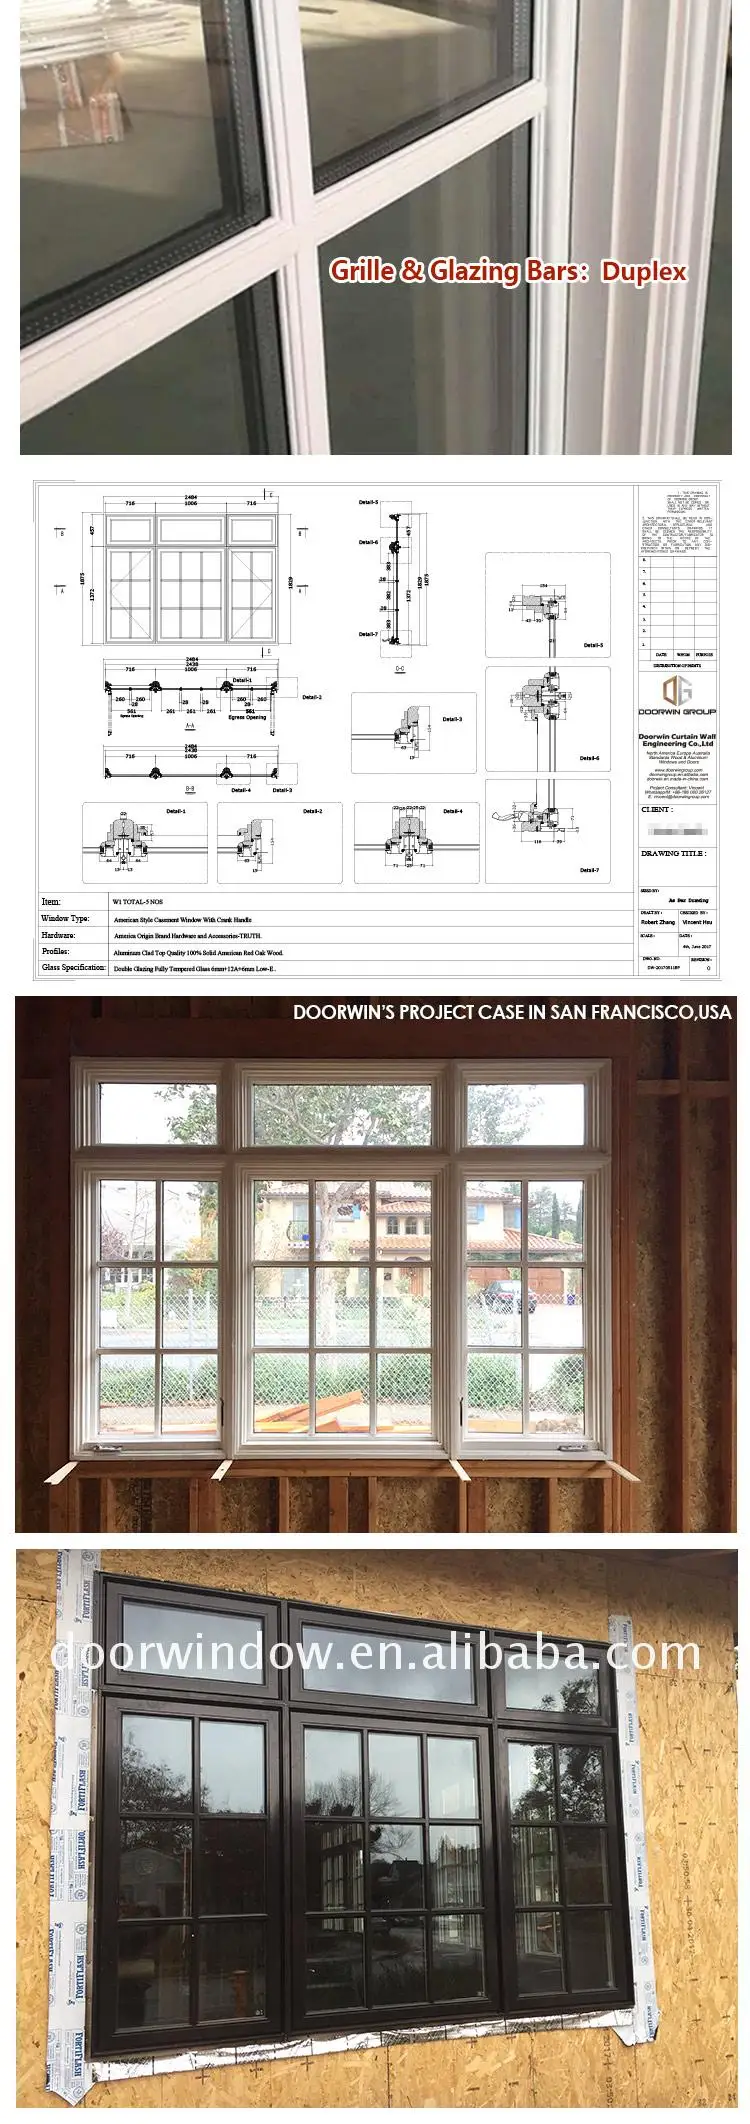 Manufactory Wholesale wooden windows for sale window with screen frames designs